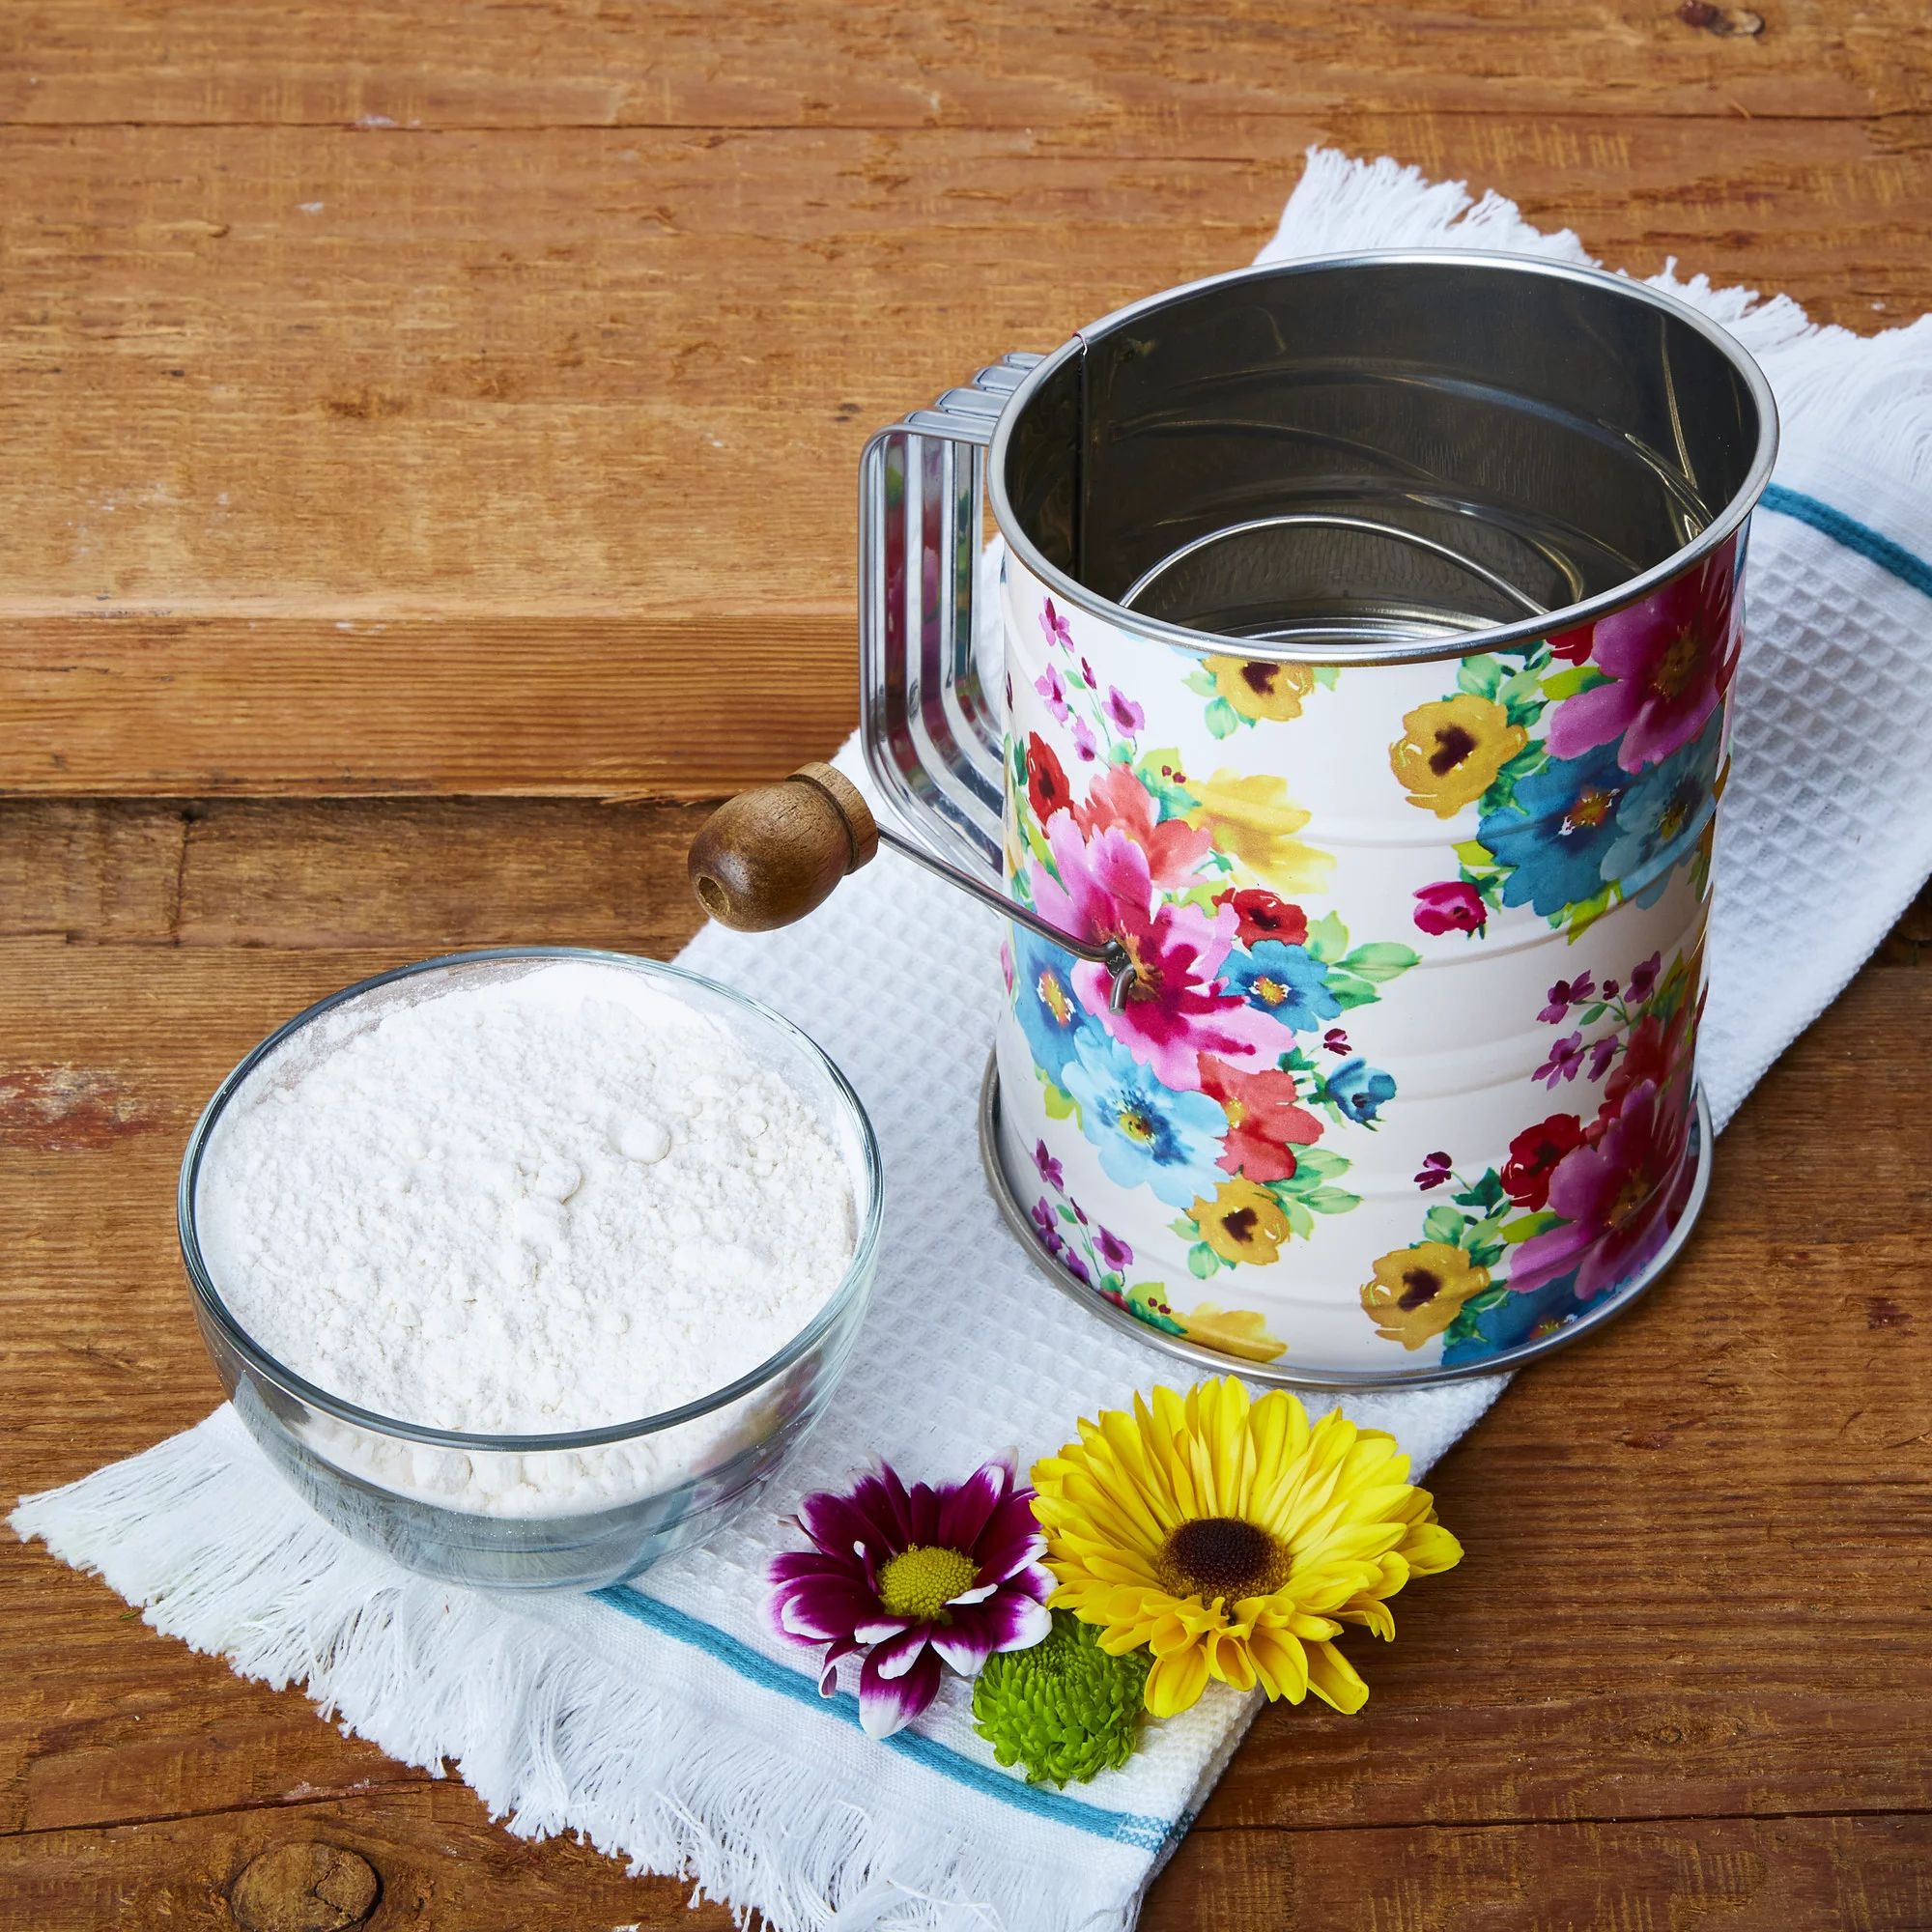 The Pioneer Woman Breezy Blossoms Stainless Steel Handheld Crank Sifter with Acacia Handle | Walmart (US)